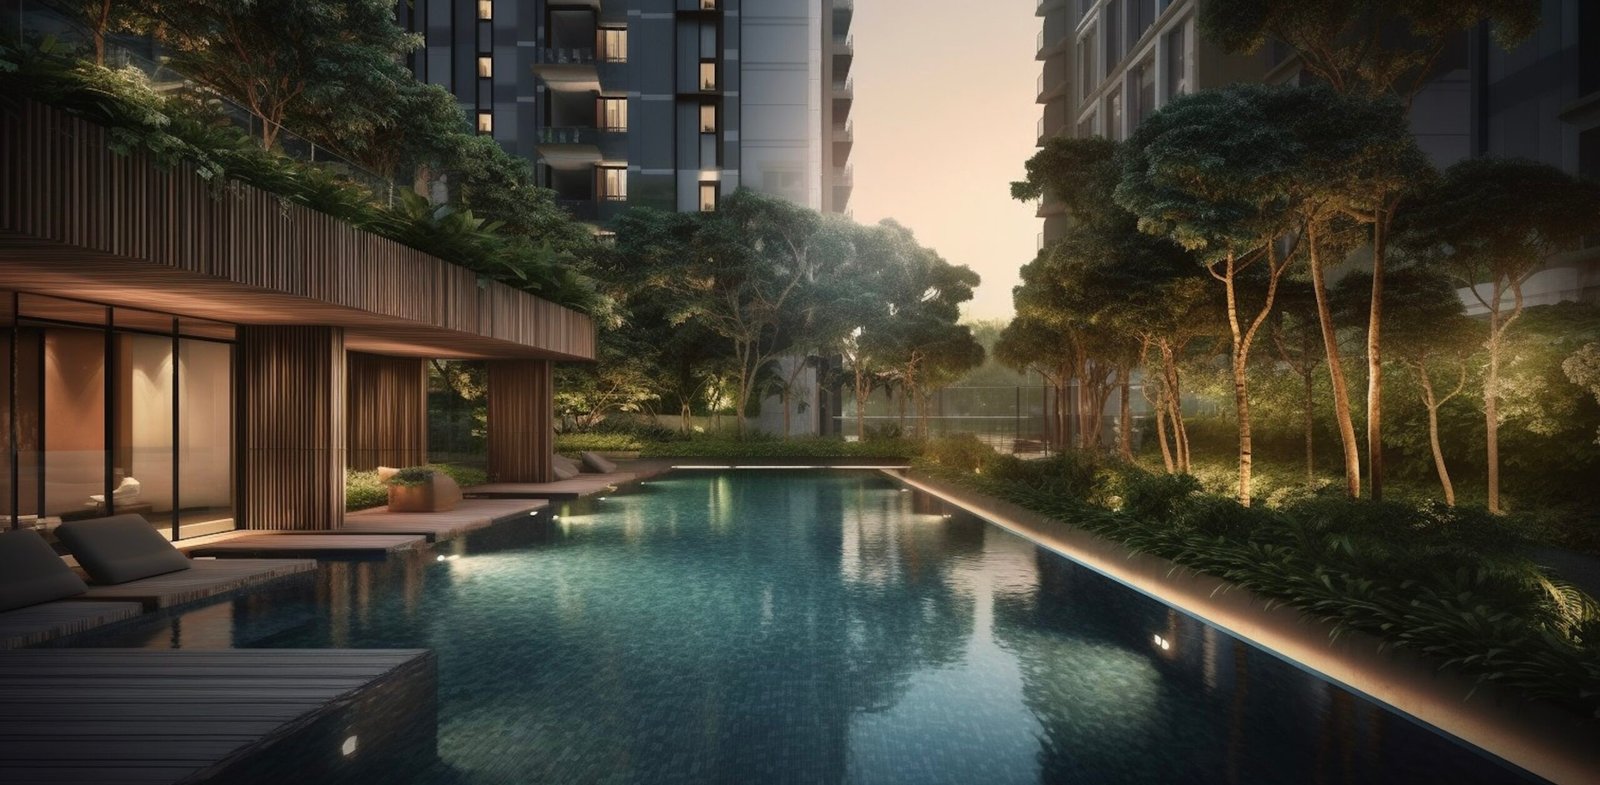 Efficient Connections, Smart Technologies and Sustainability: URA’s Master Plan Transforms Upper Thomson Road Condo into an Attractive and Harmonious Place to Live